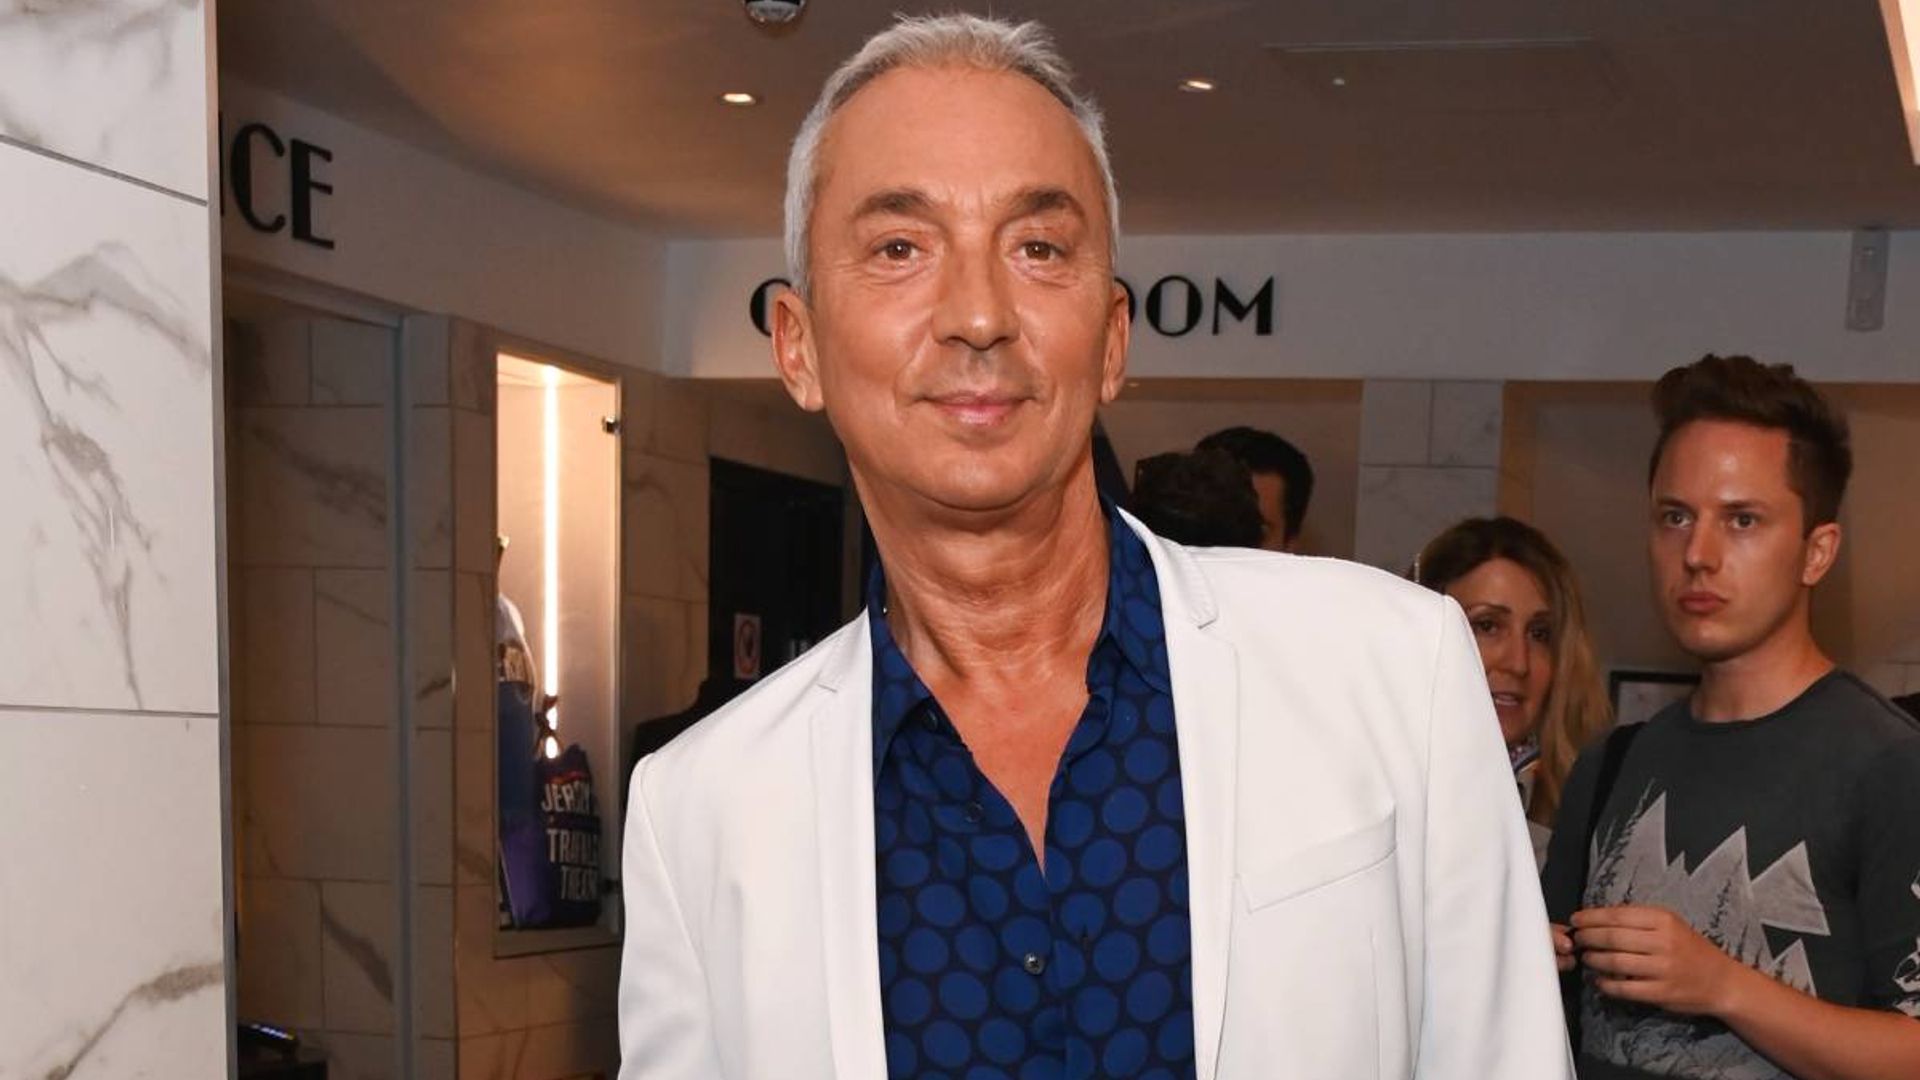 Bruno Tonioli looks 'frightening' in must-see DWTS throwback photo